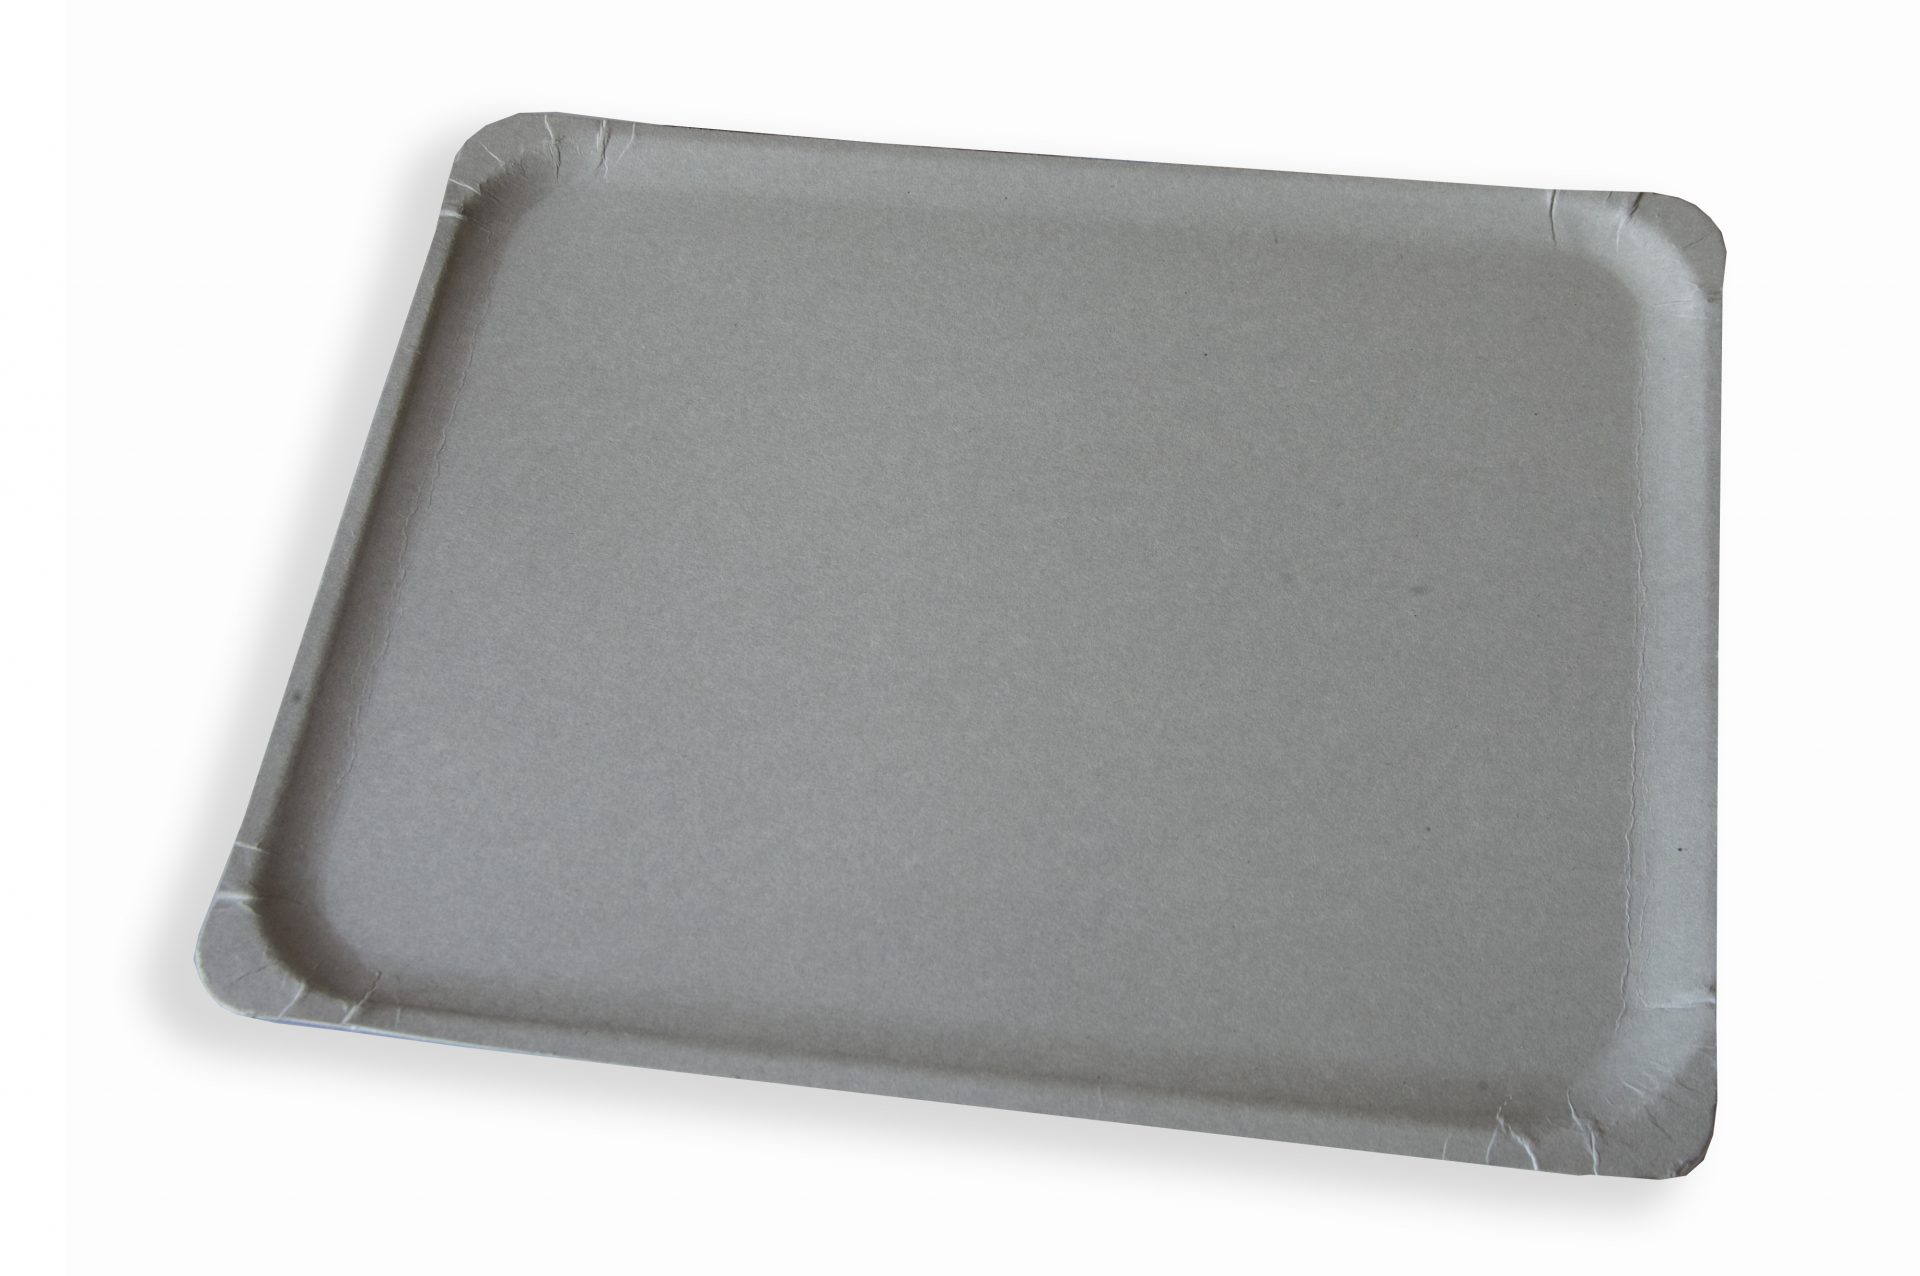 White paper plates and trays